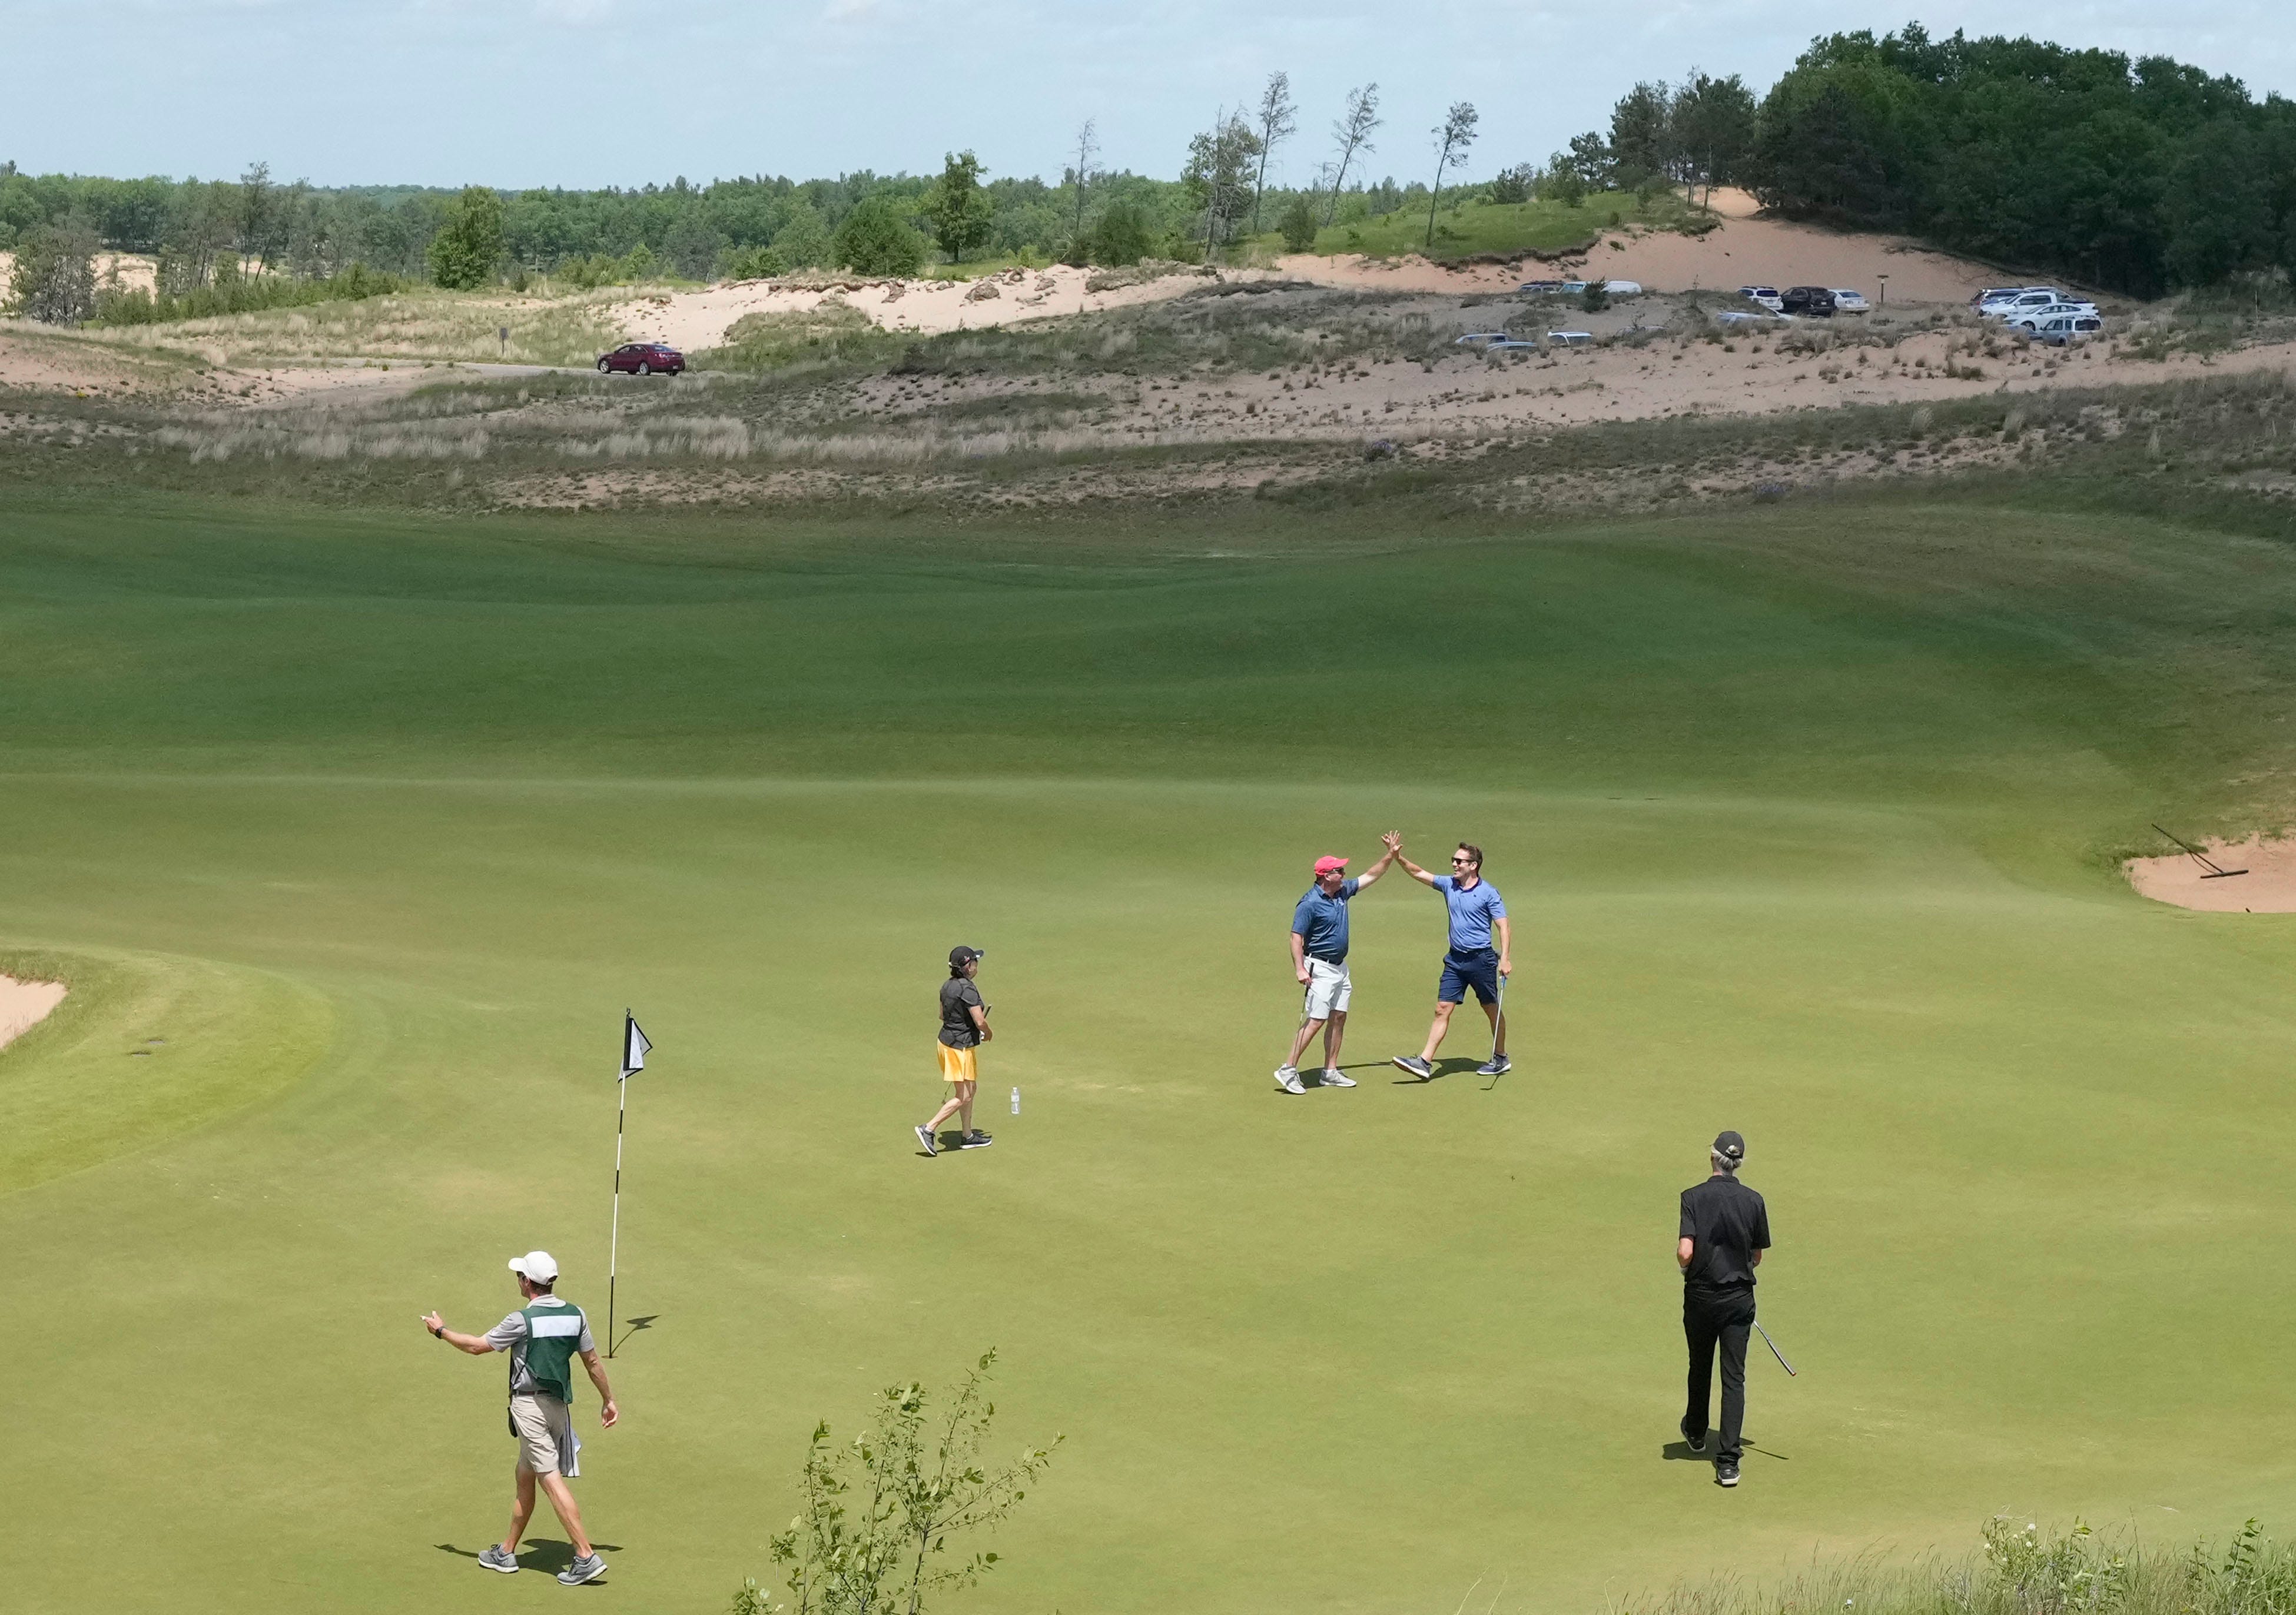 Golfers celebrate a putt on the 18th hole at the Sand Valley course at Sand Valley Golf Resort in Rome on June 2.